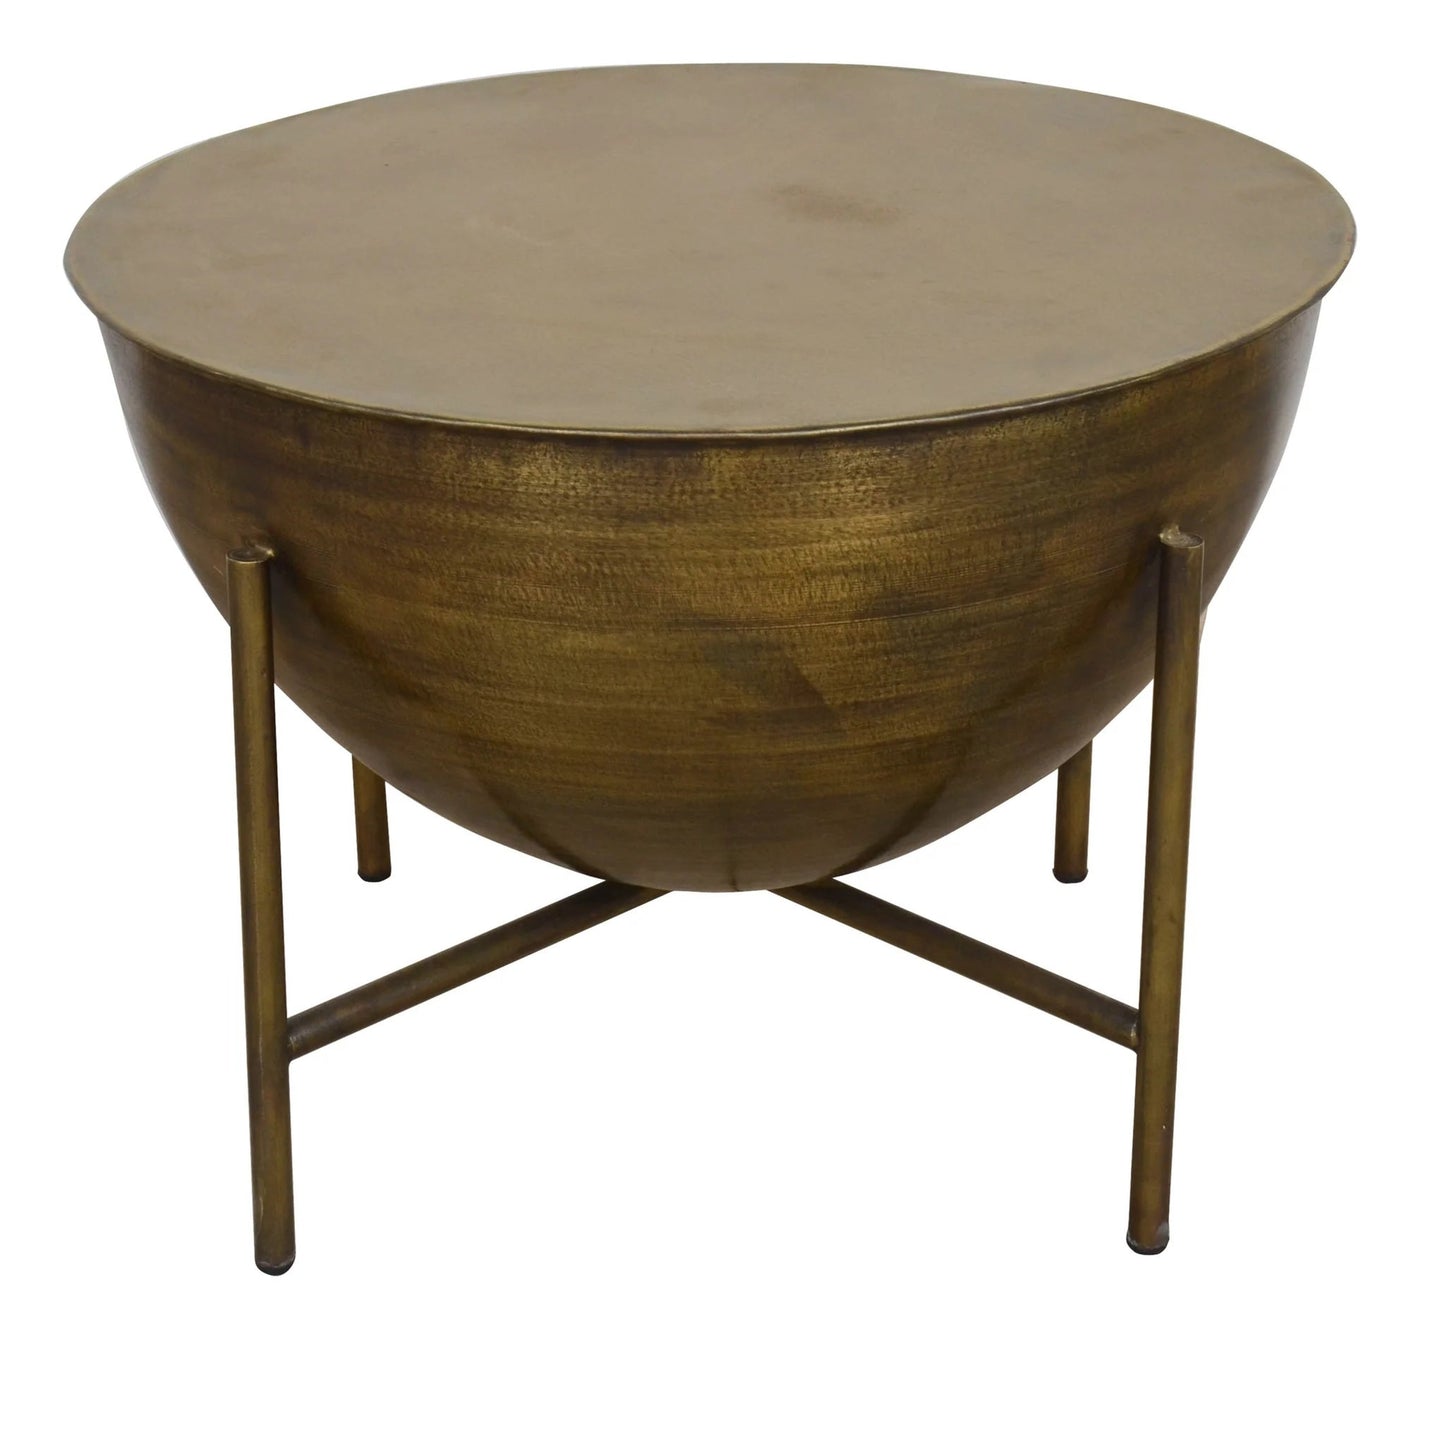 Coffee Table With Metal Legs, Antique Brass Finish, 40% off